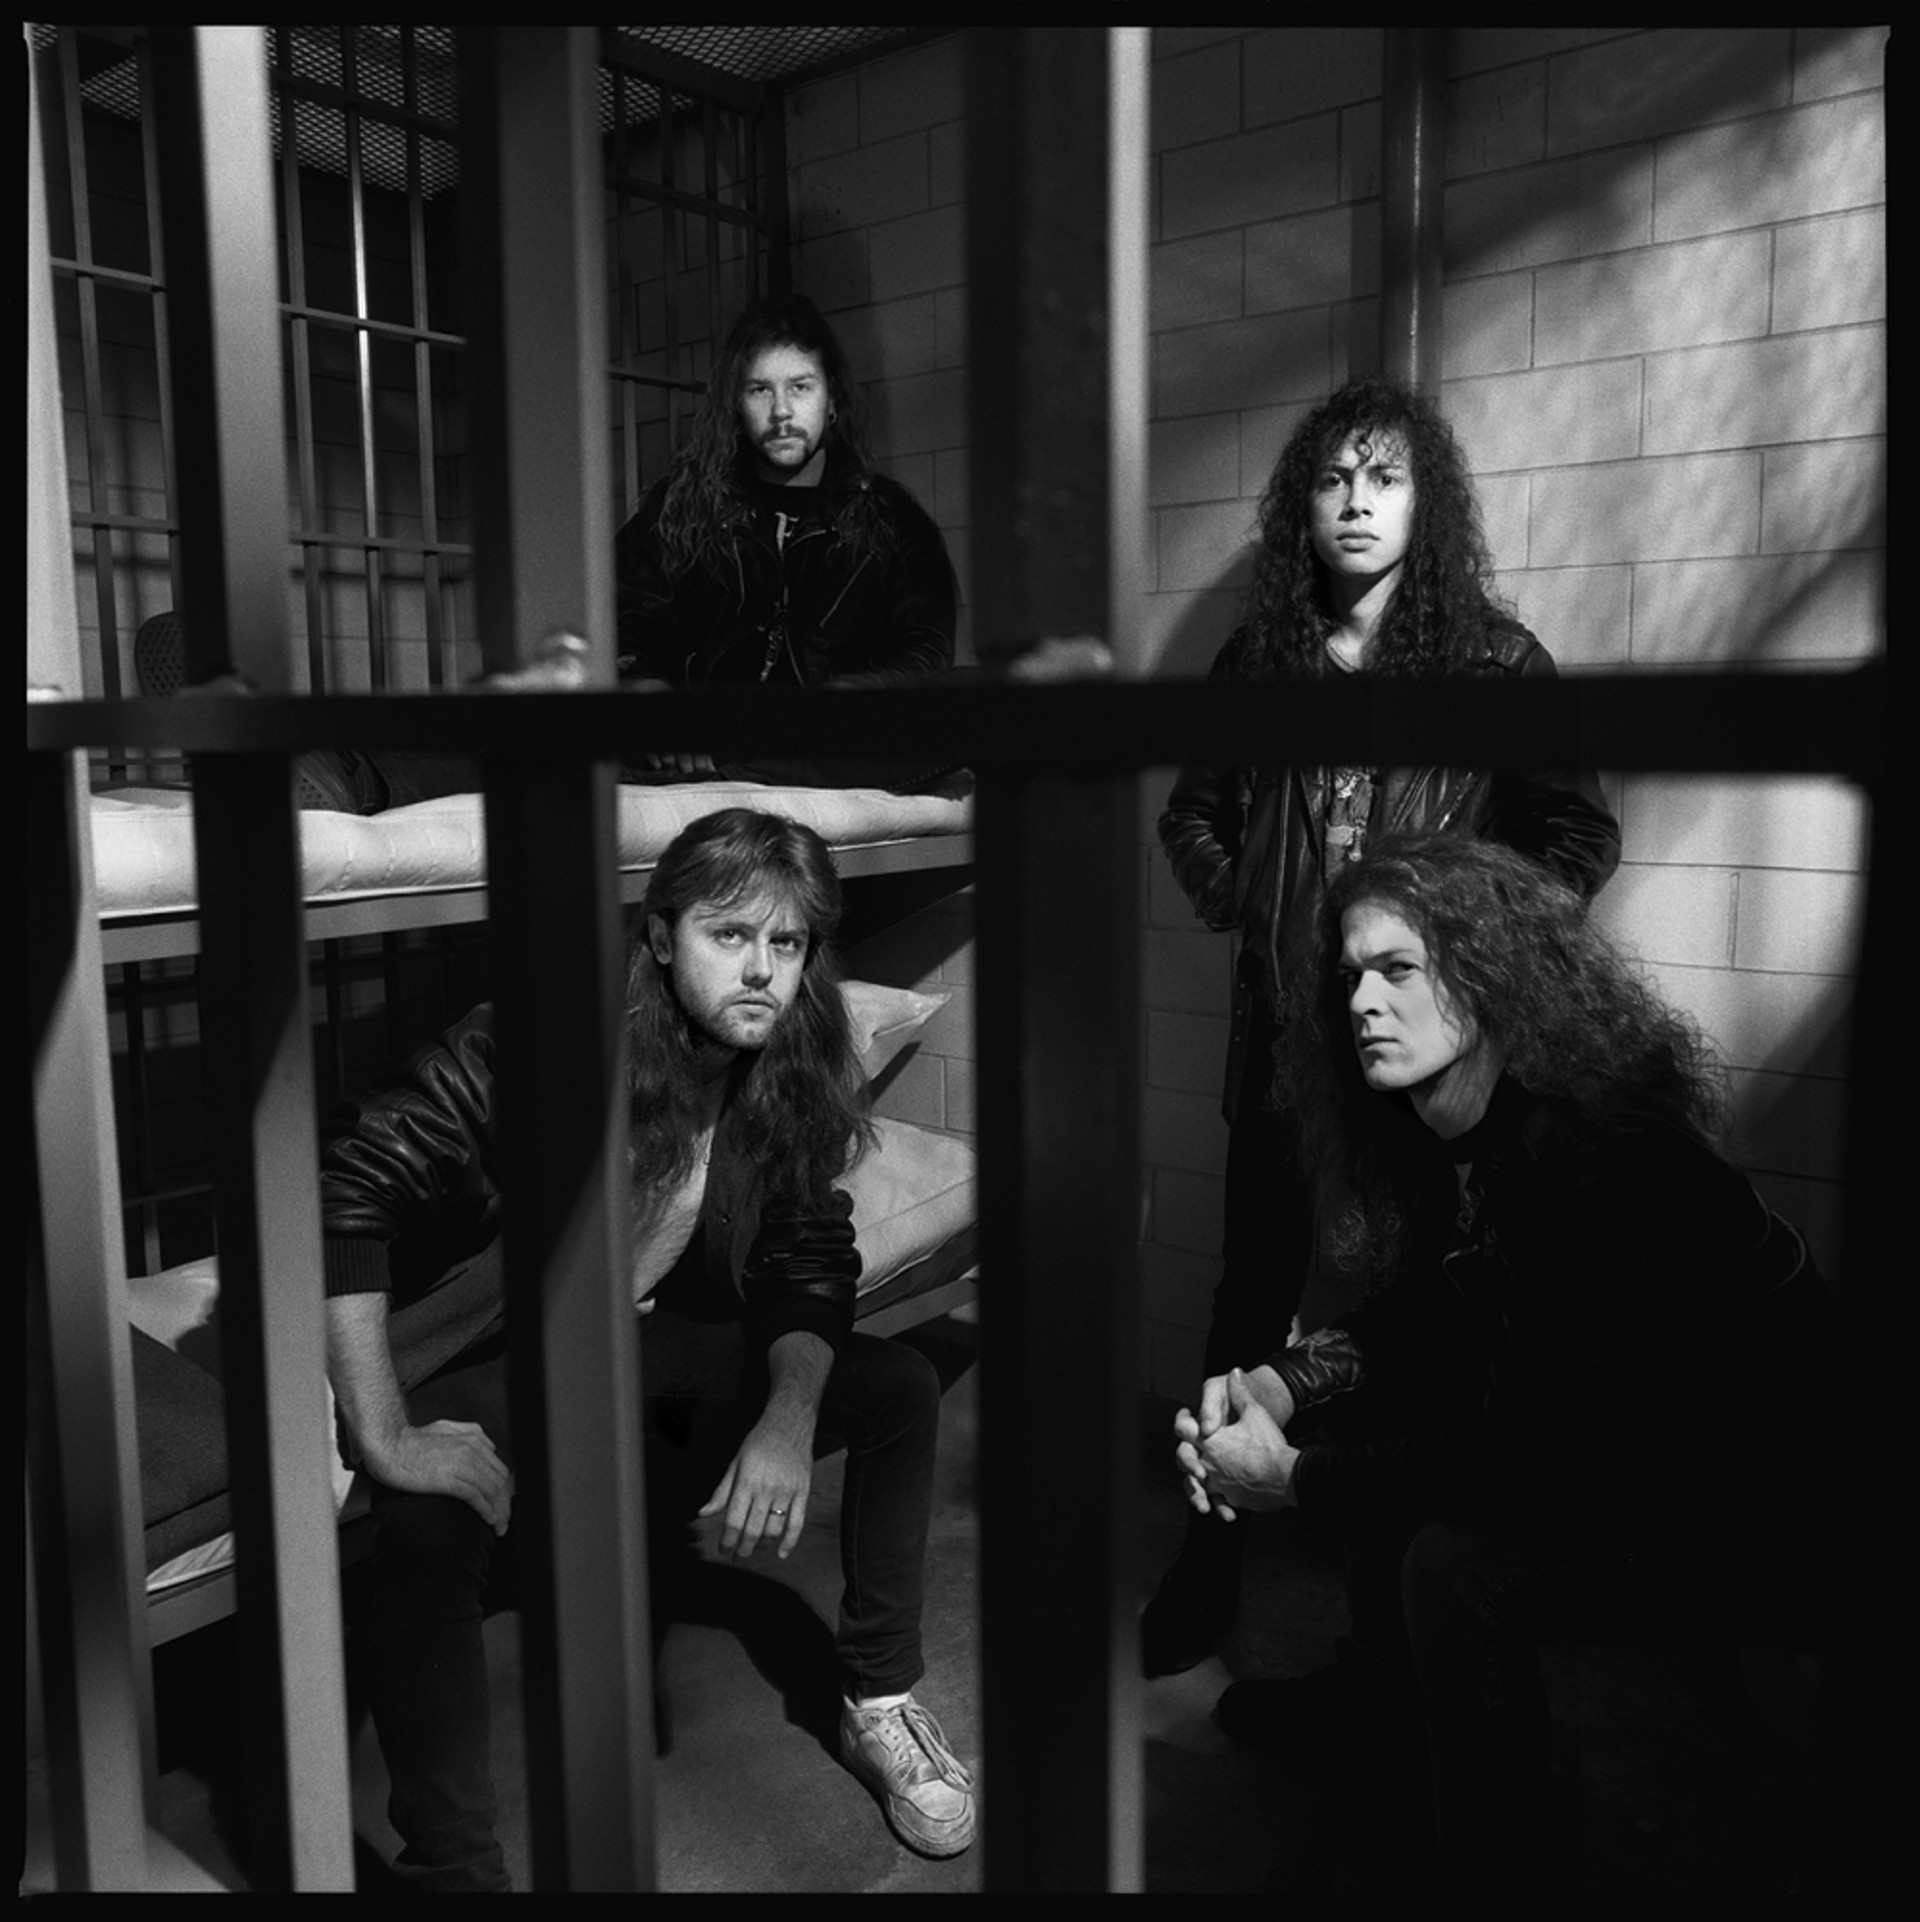 88205 Metallica In Jail Cell BW by Timothy White